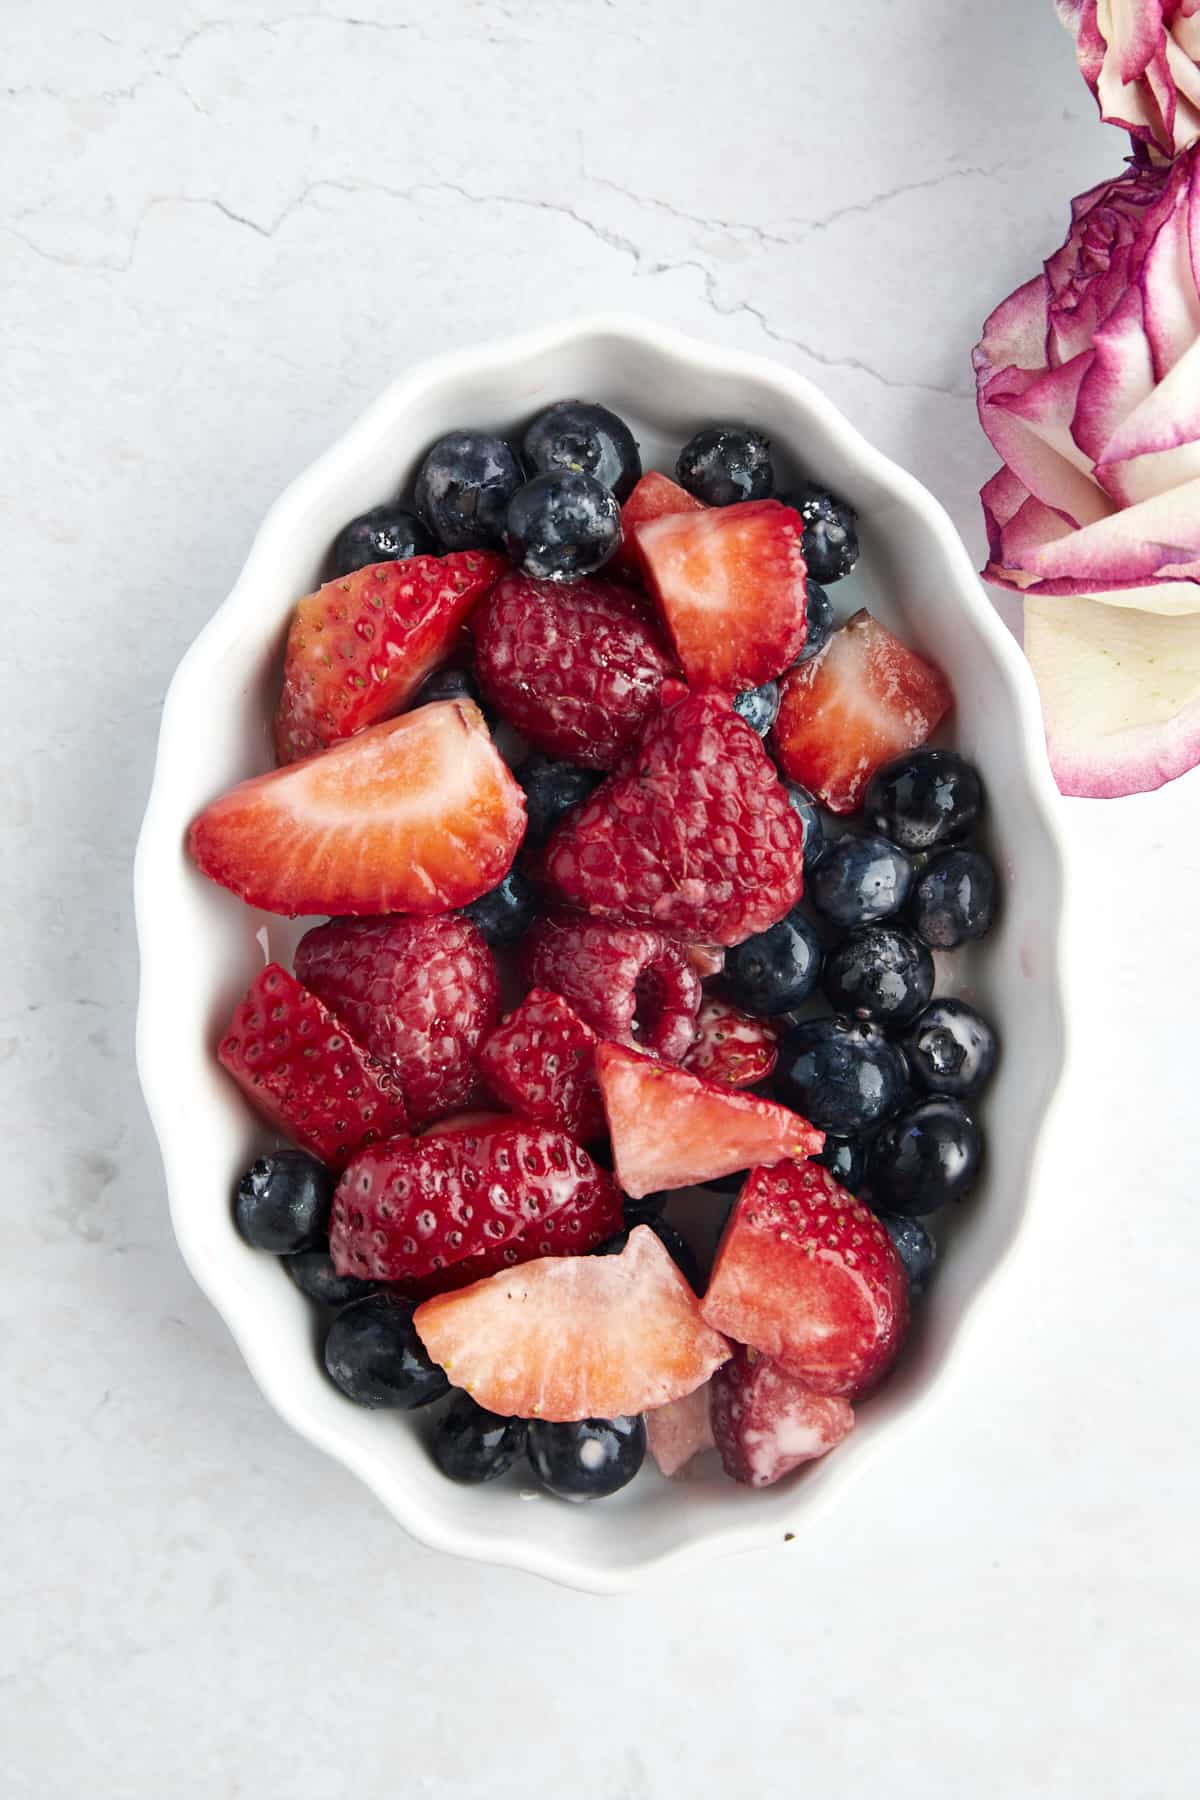 Raspberries, strawberries, and blueberries in an oval baking dish. 